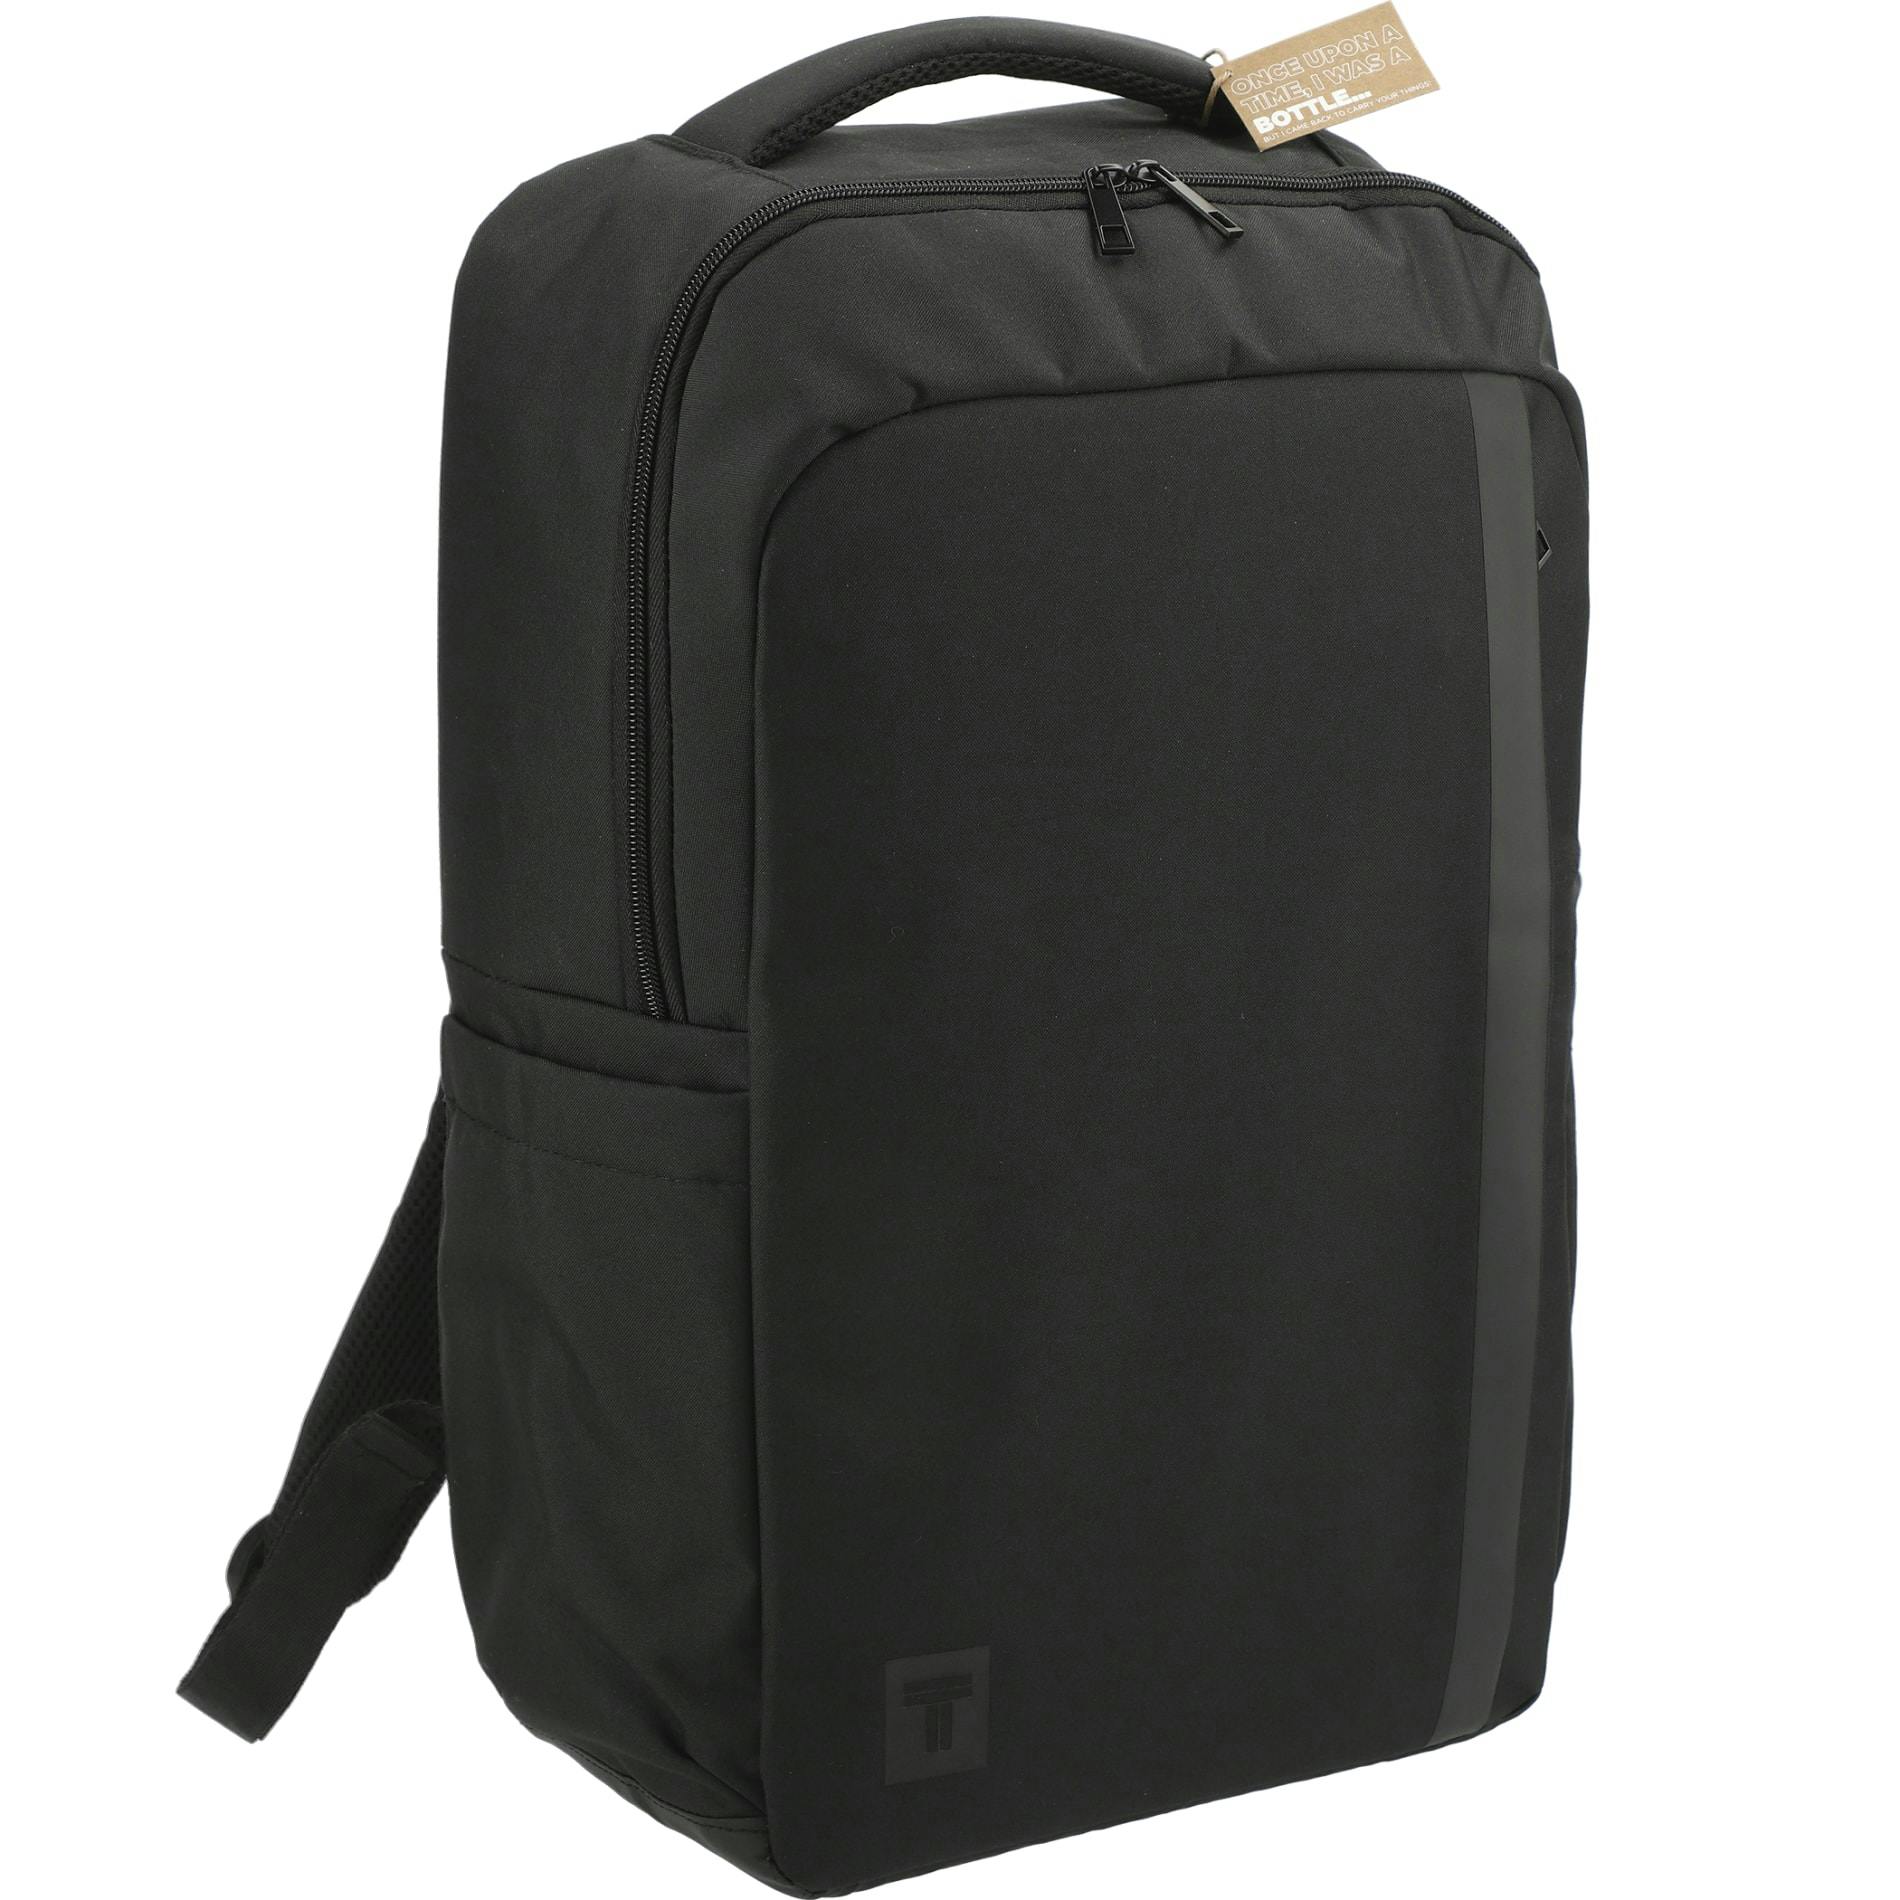 Tranzip Recycled 17" Computer Backpack - additional Image 3